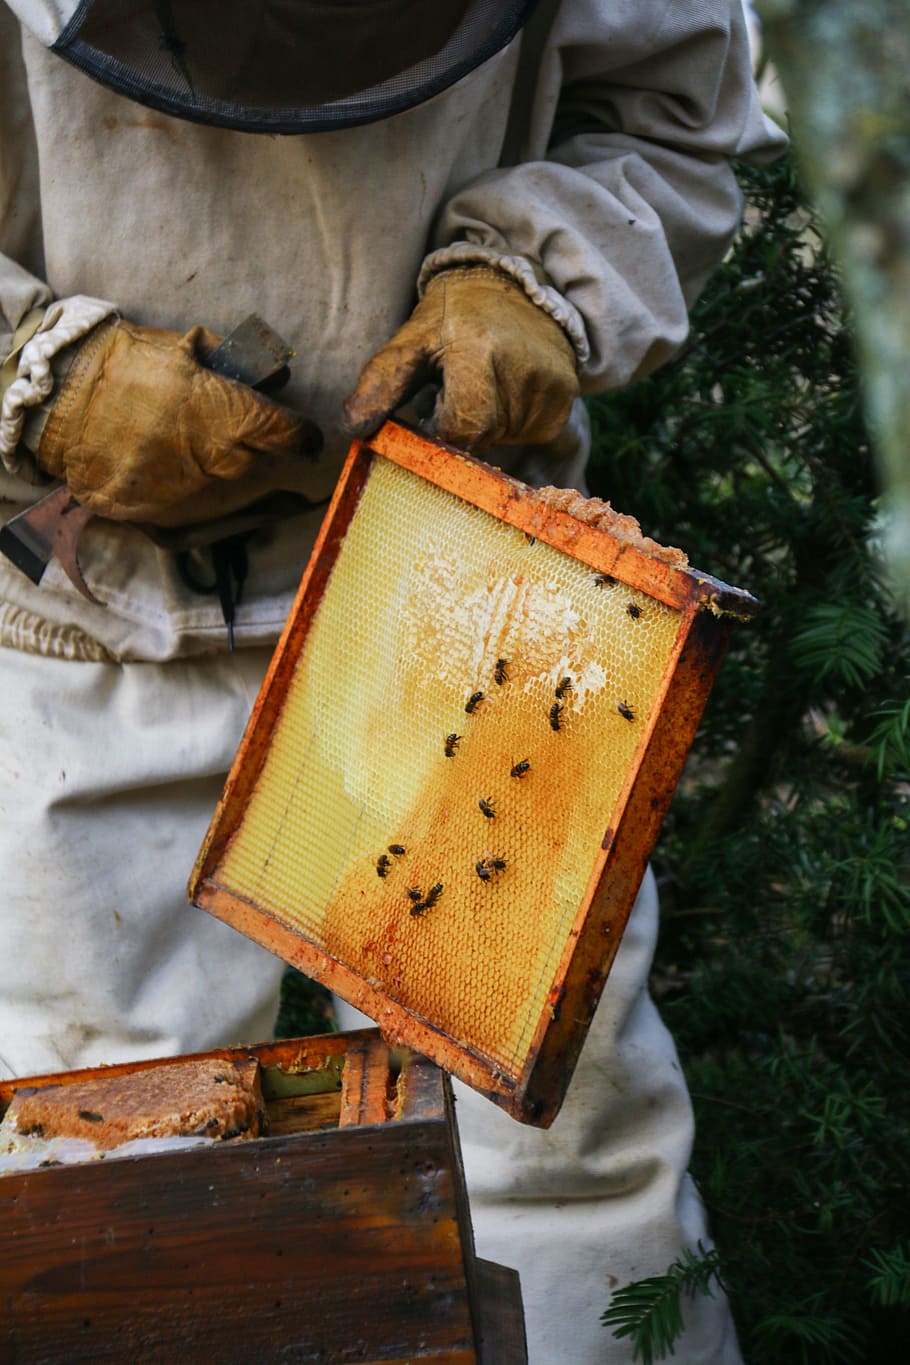 Beekeeper, Honey, Hive, Bees, Nature, insect, cell, swarm, beekeeping, wax